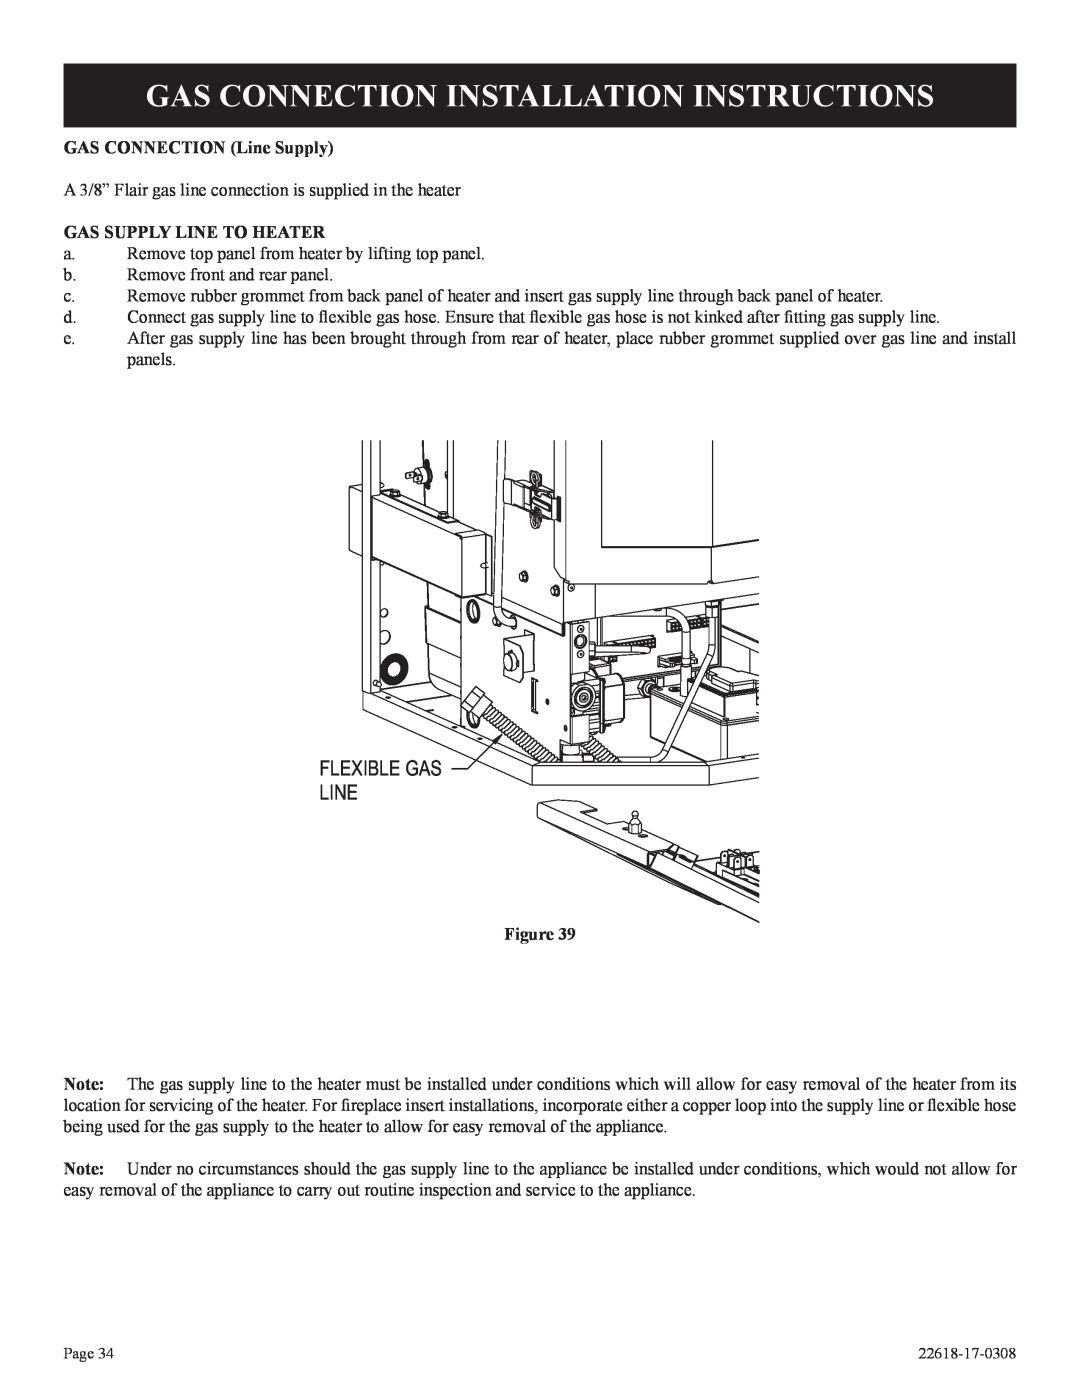 Empire Comfort Systems BP)-1, GN Gas Connection Installation Instructions, Flexible Gas Line, GAS CONNECTION Line Supply 